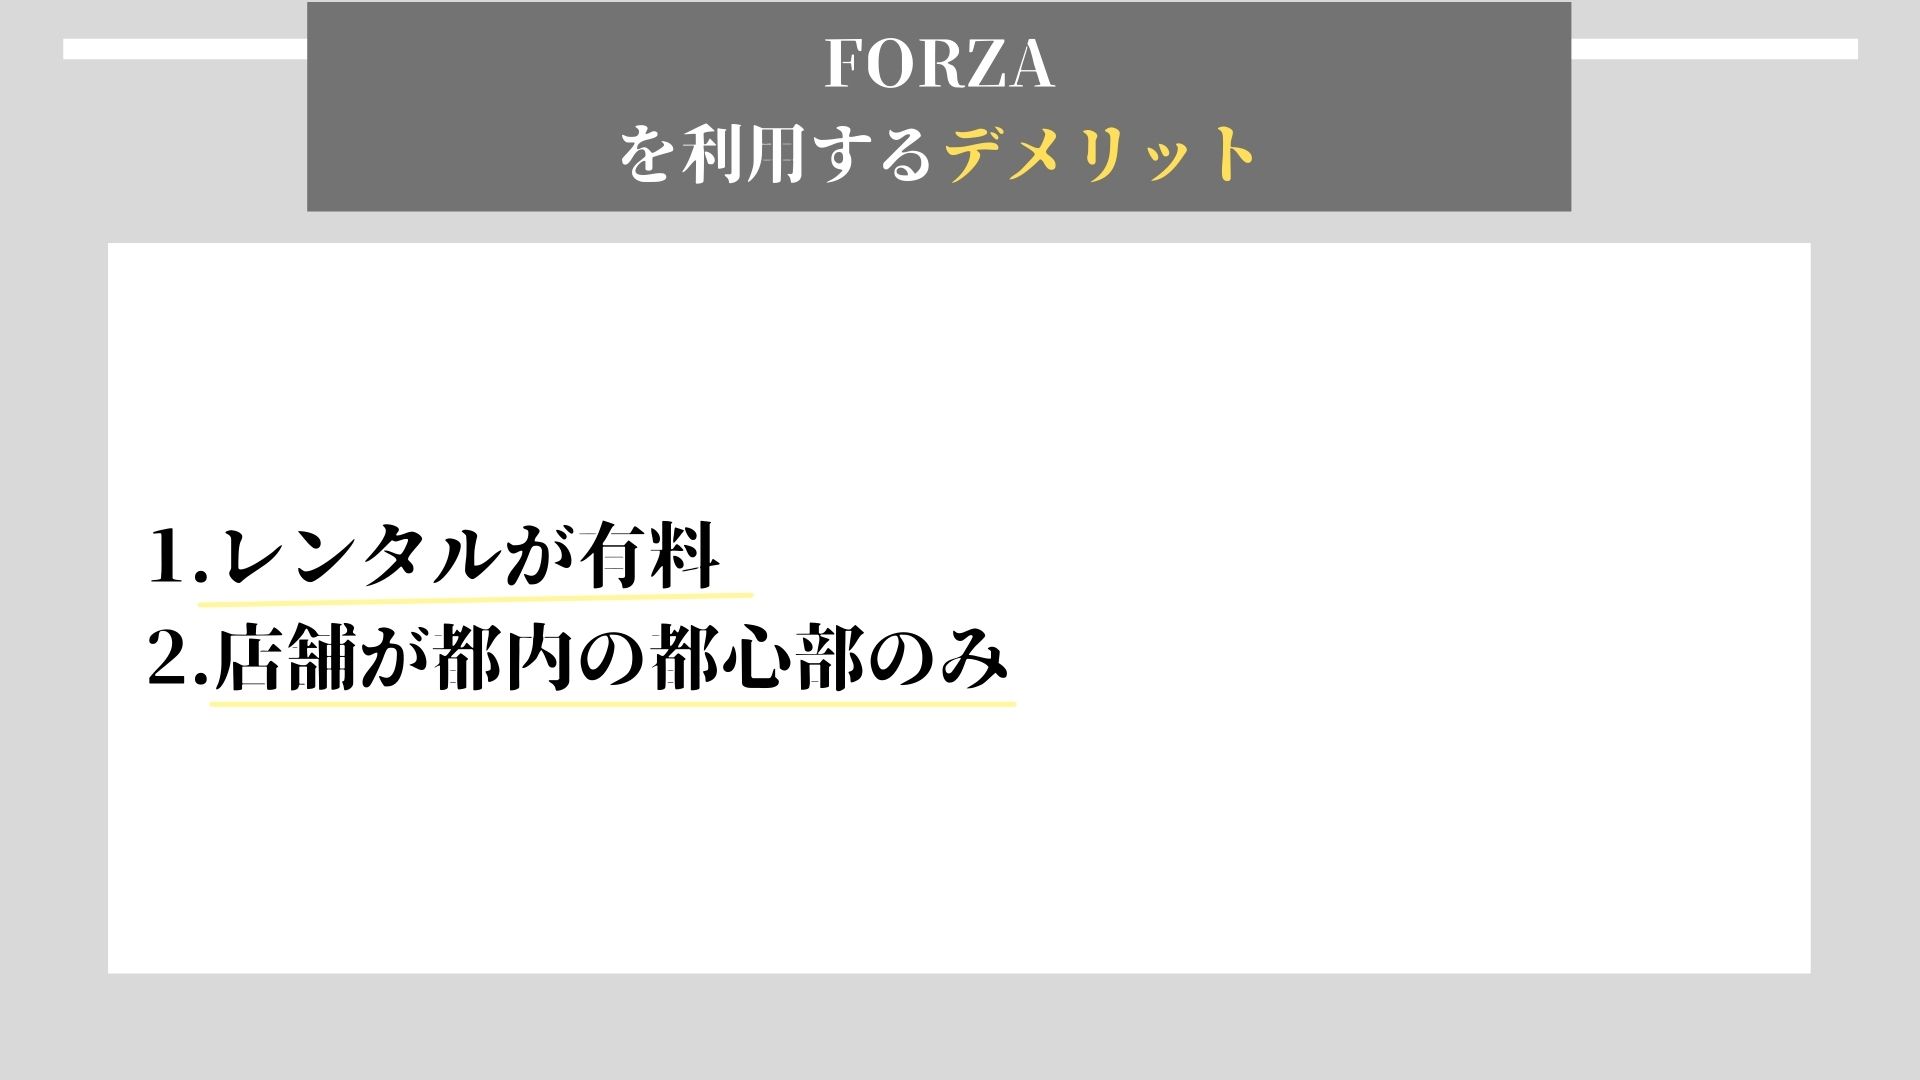 FORZA　デメリット